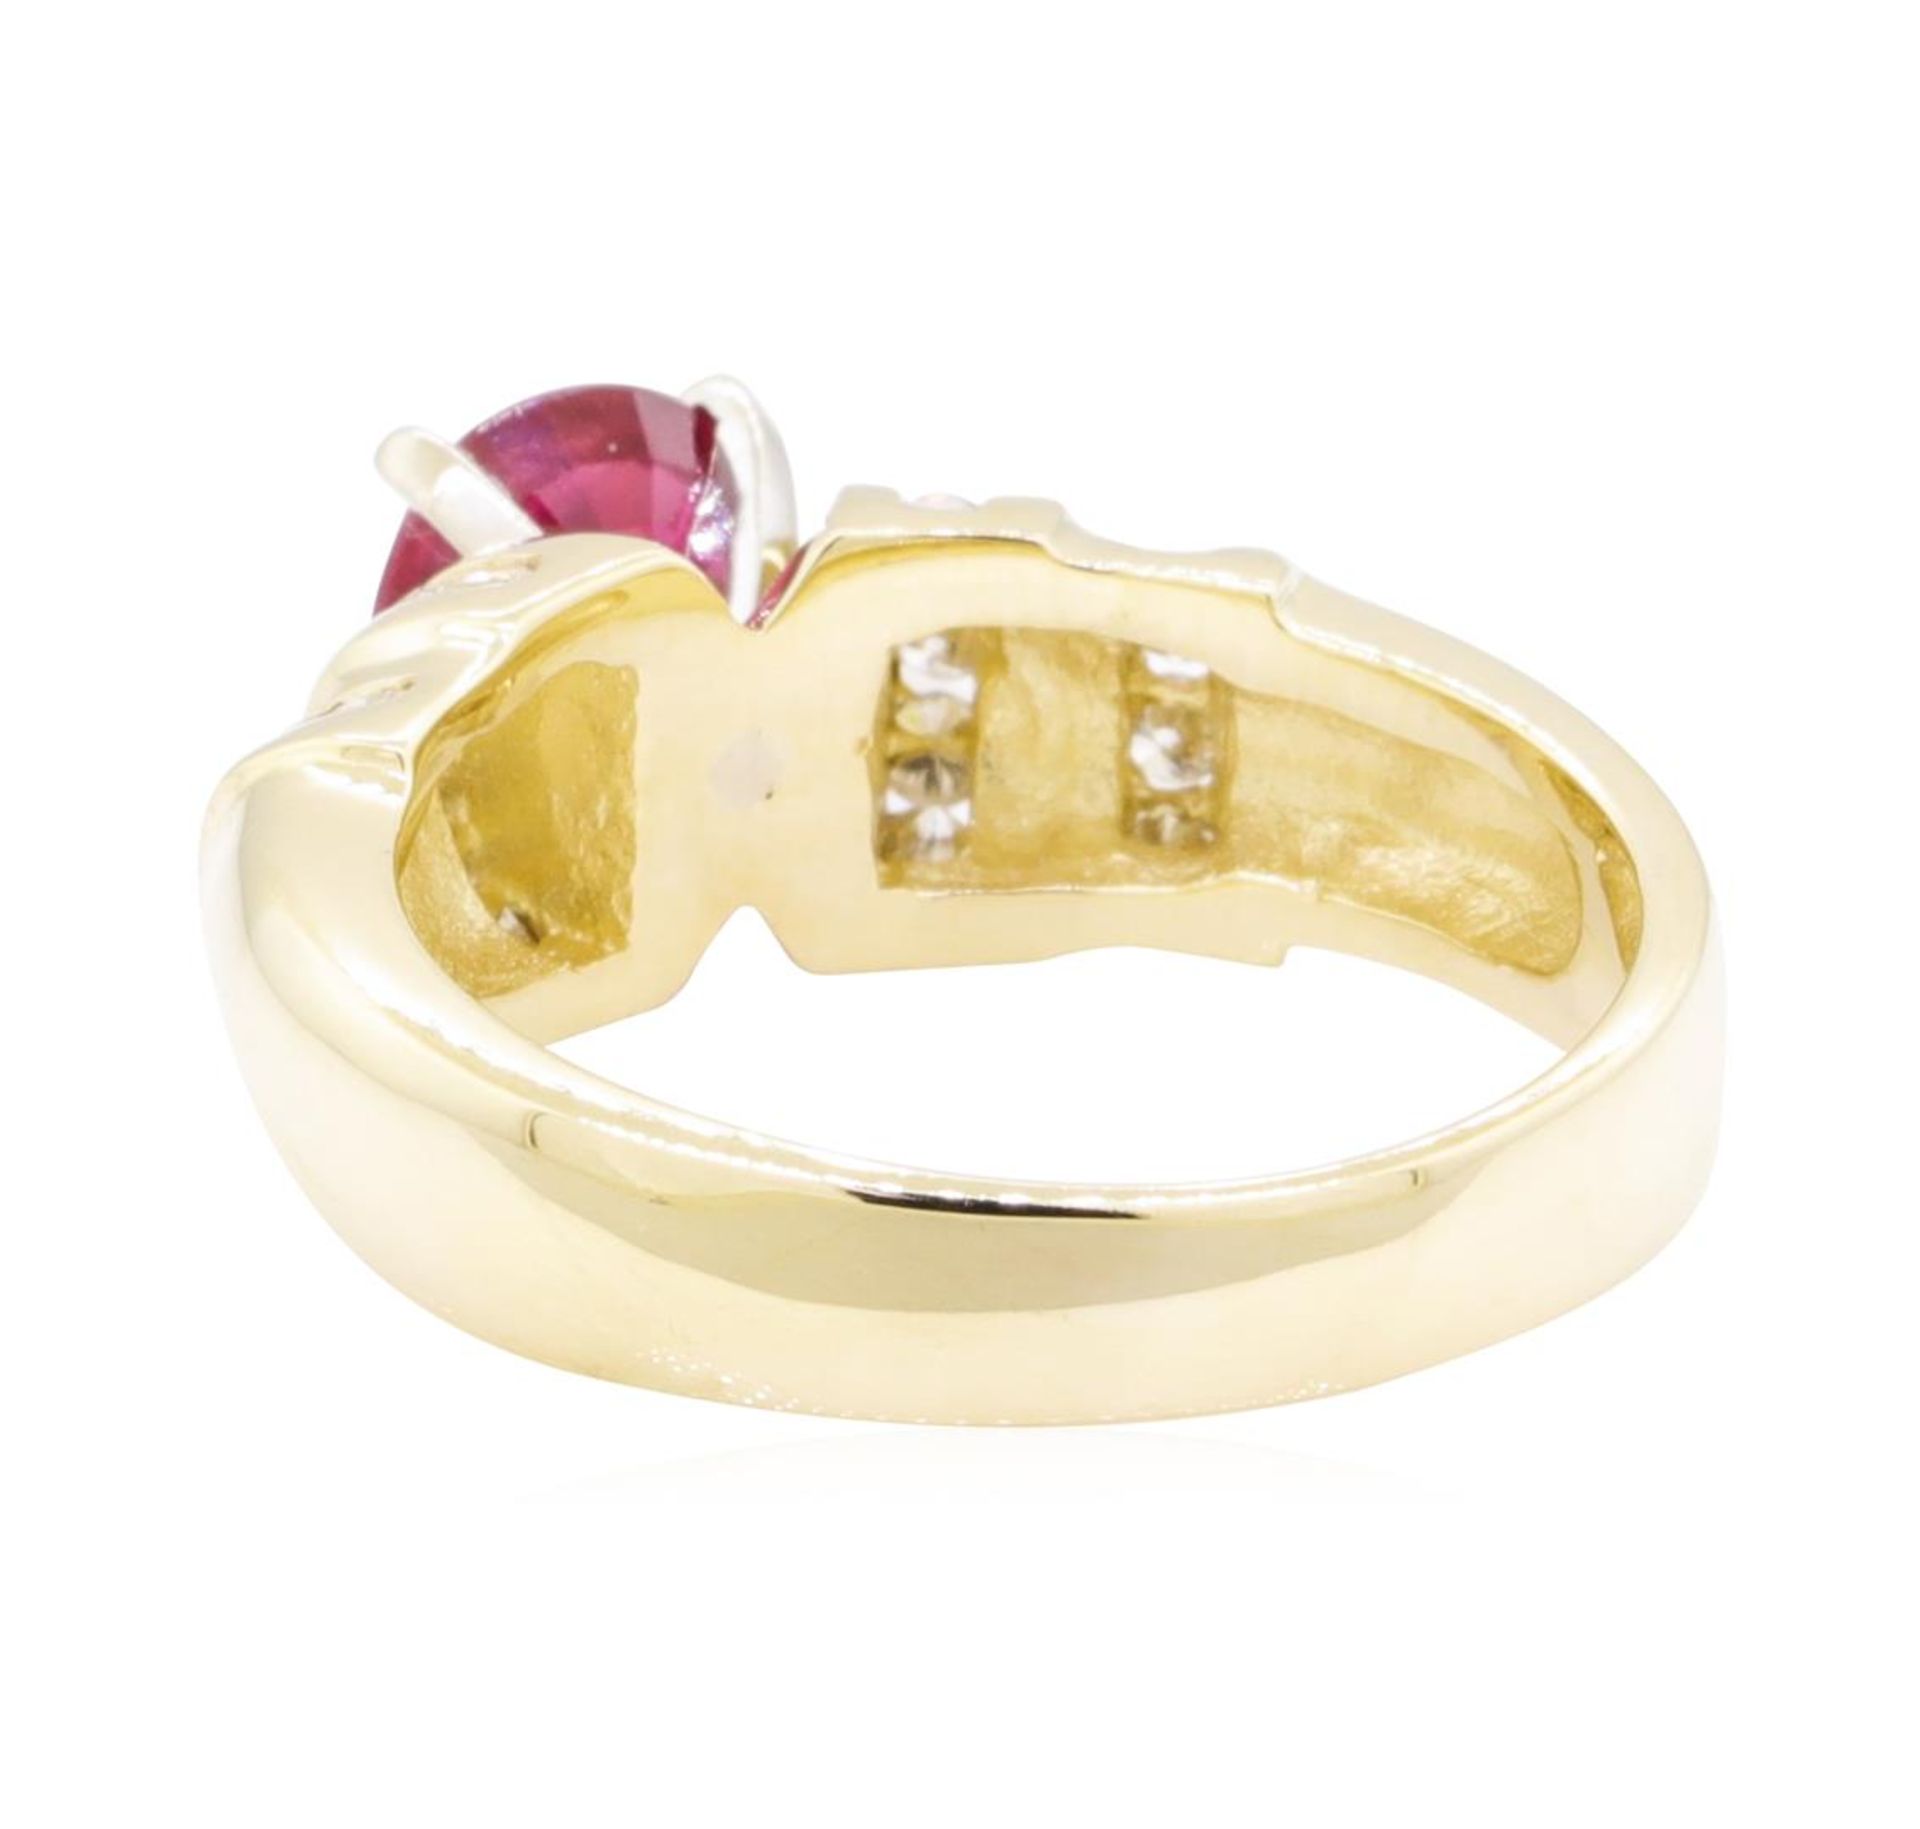 1.67 ctw Ruby And Diamond Ring - 14KT Yellow Gold - Image 3 of 5